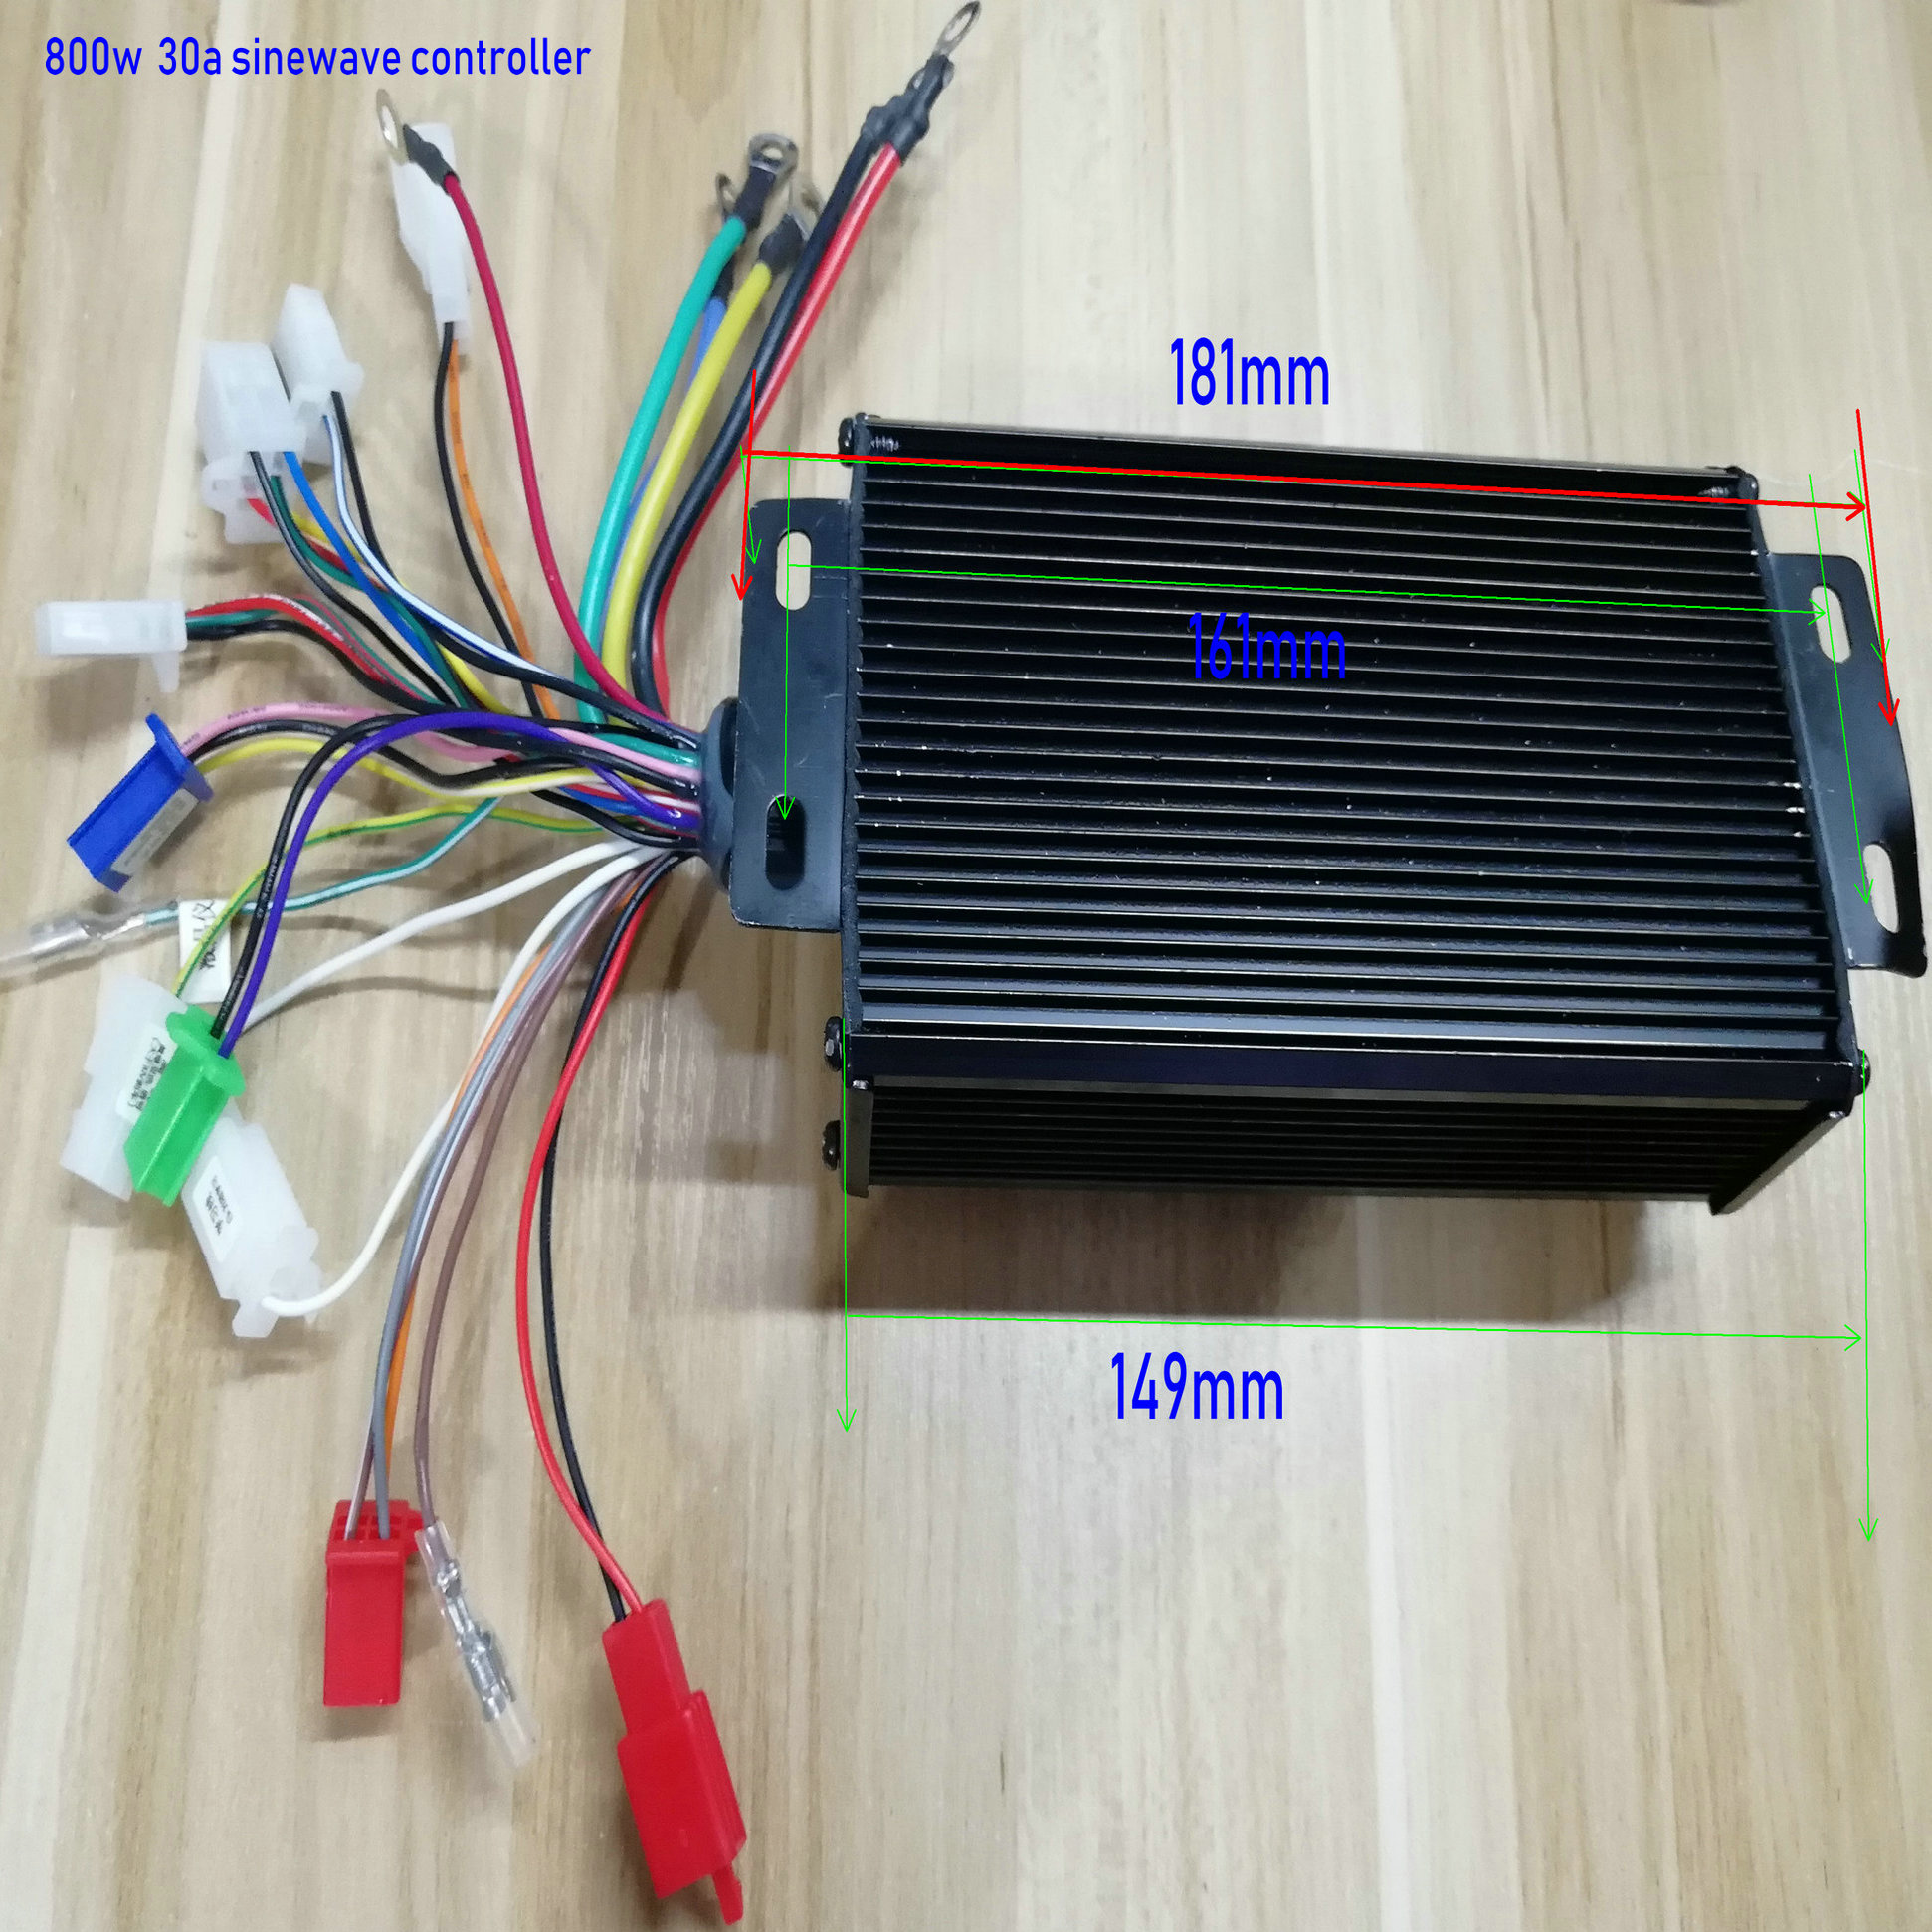 36v48v60v64v30A controller sinewave for electric scooter electric bicycle accessory tricycle bike accessories MTB scooter parts